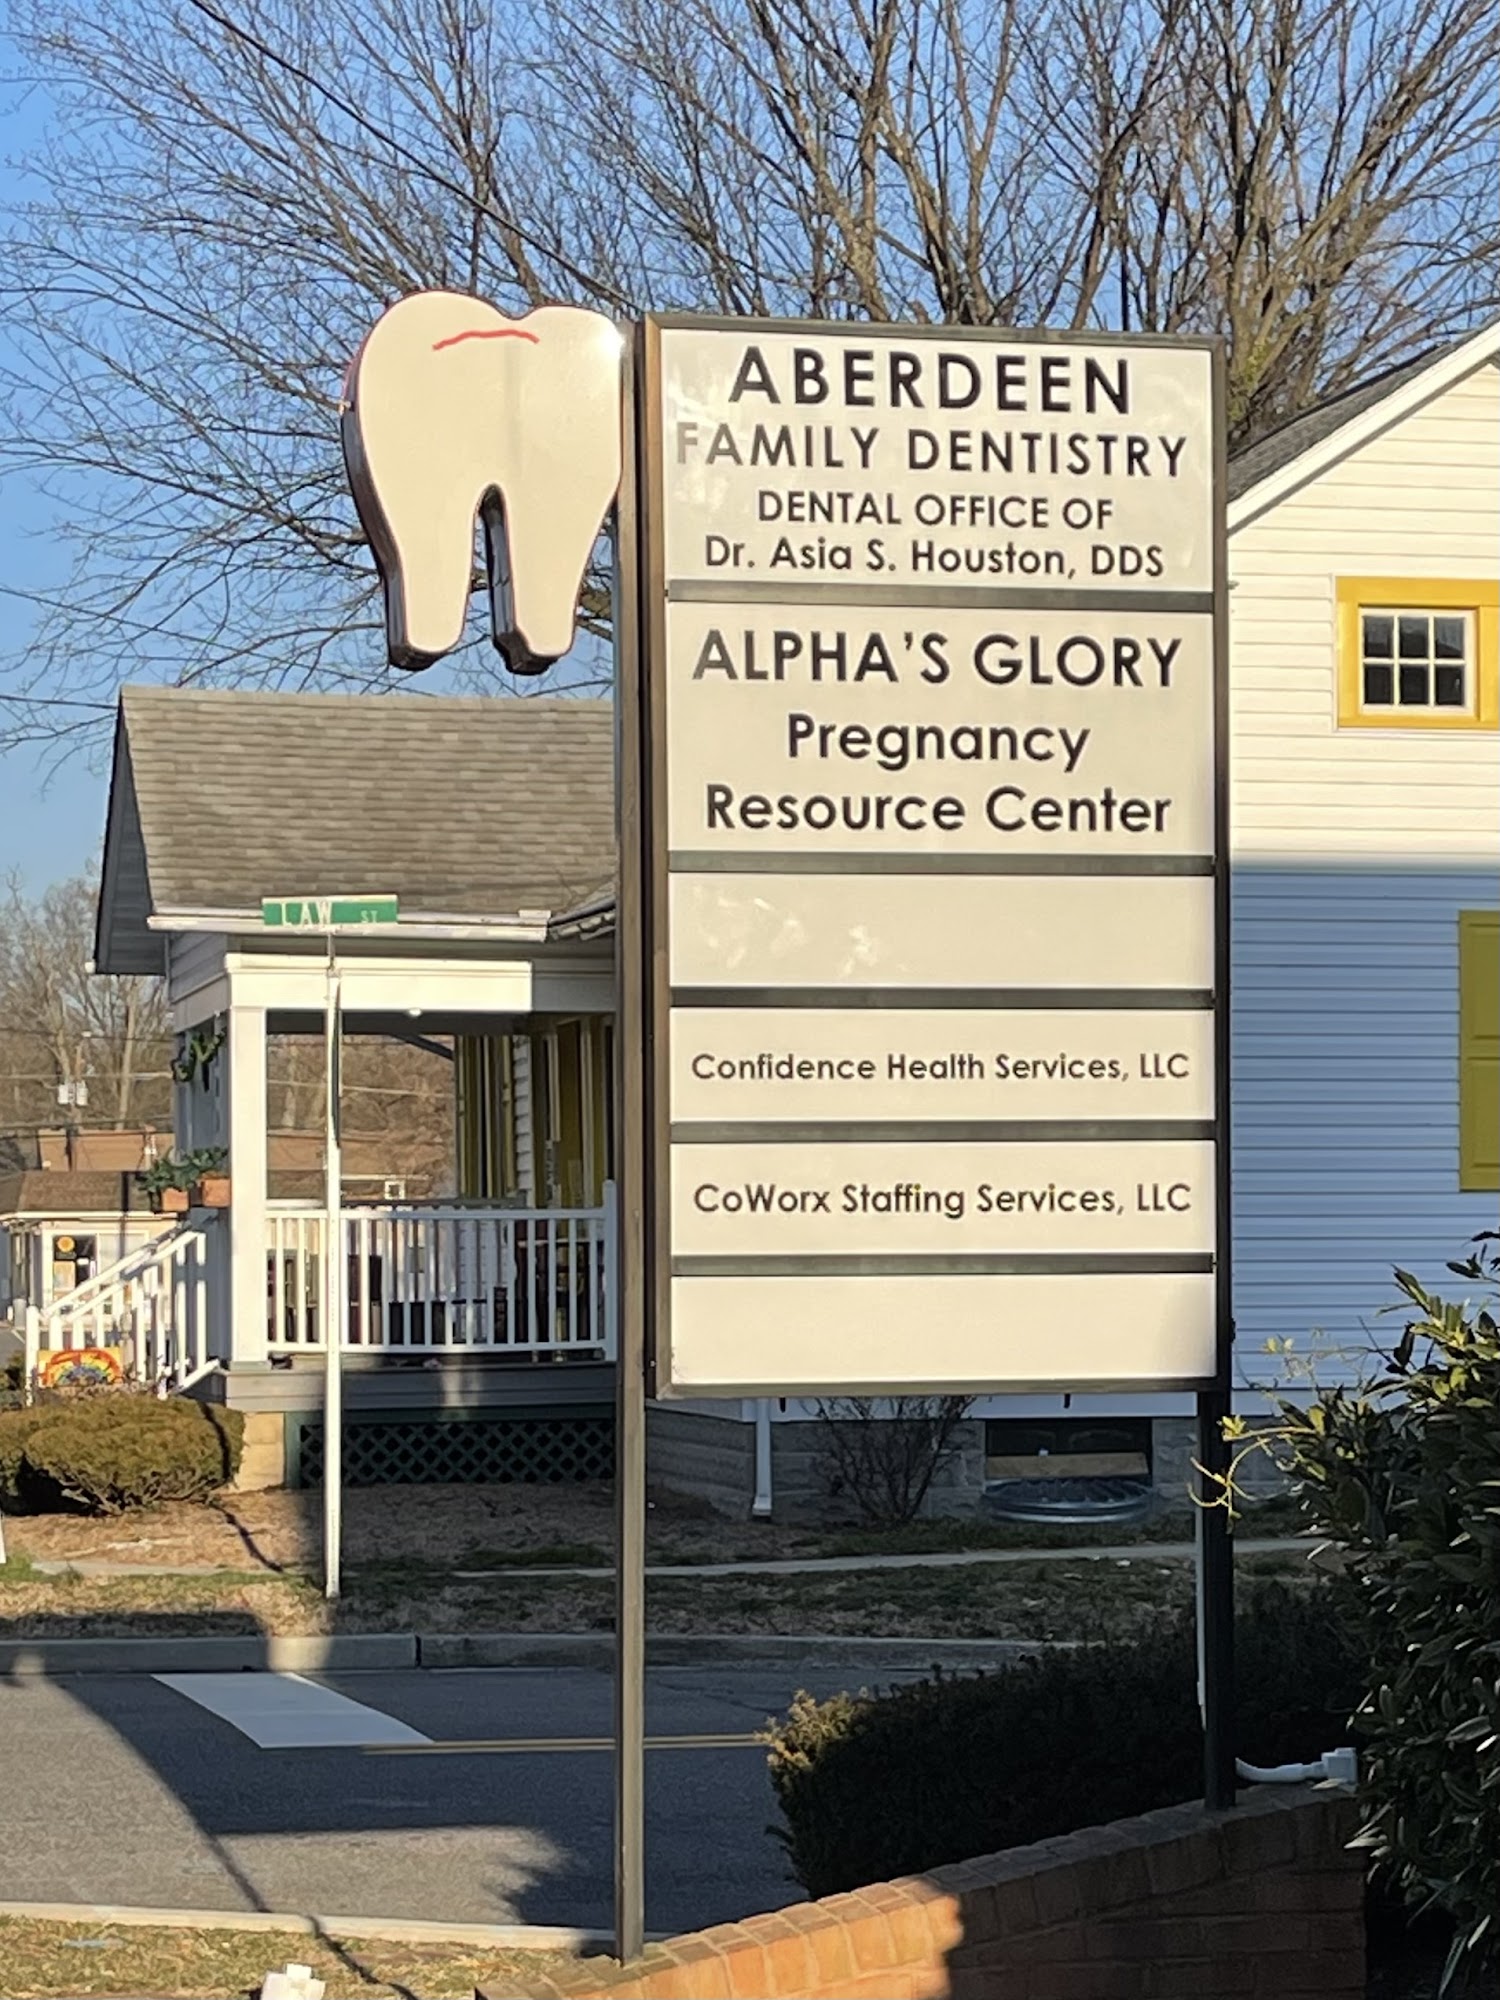 Aberdeen Family Dentistry: Asia S. Houston, DDS 219 W Bel Air Ave, Aberdeen Maryland 21001